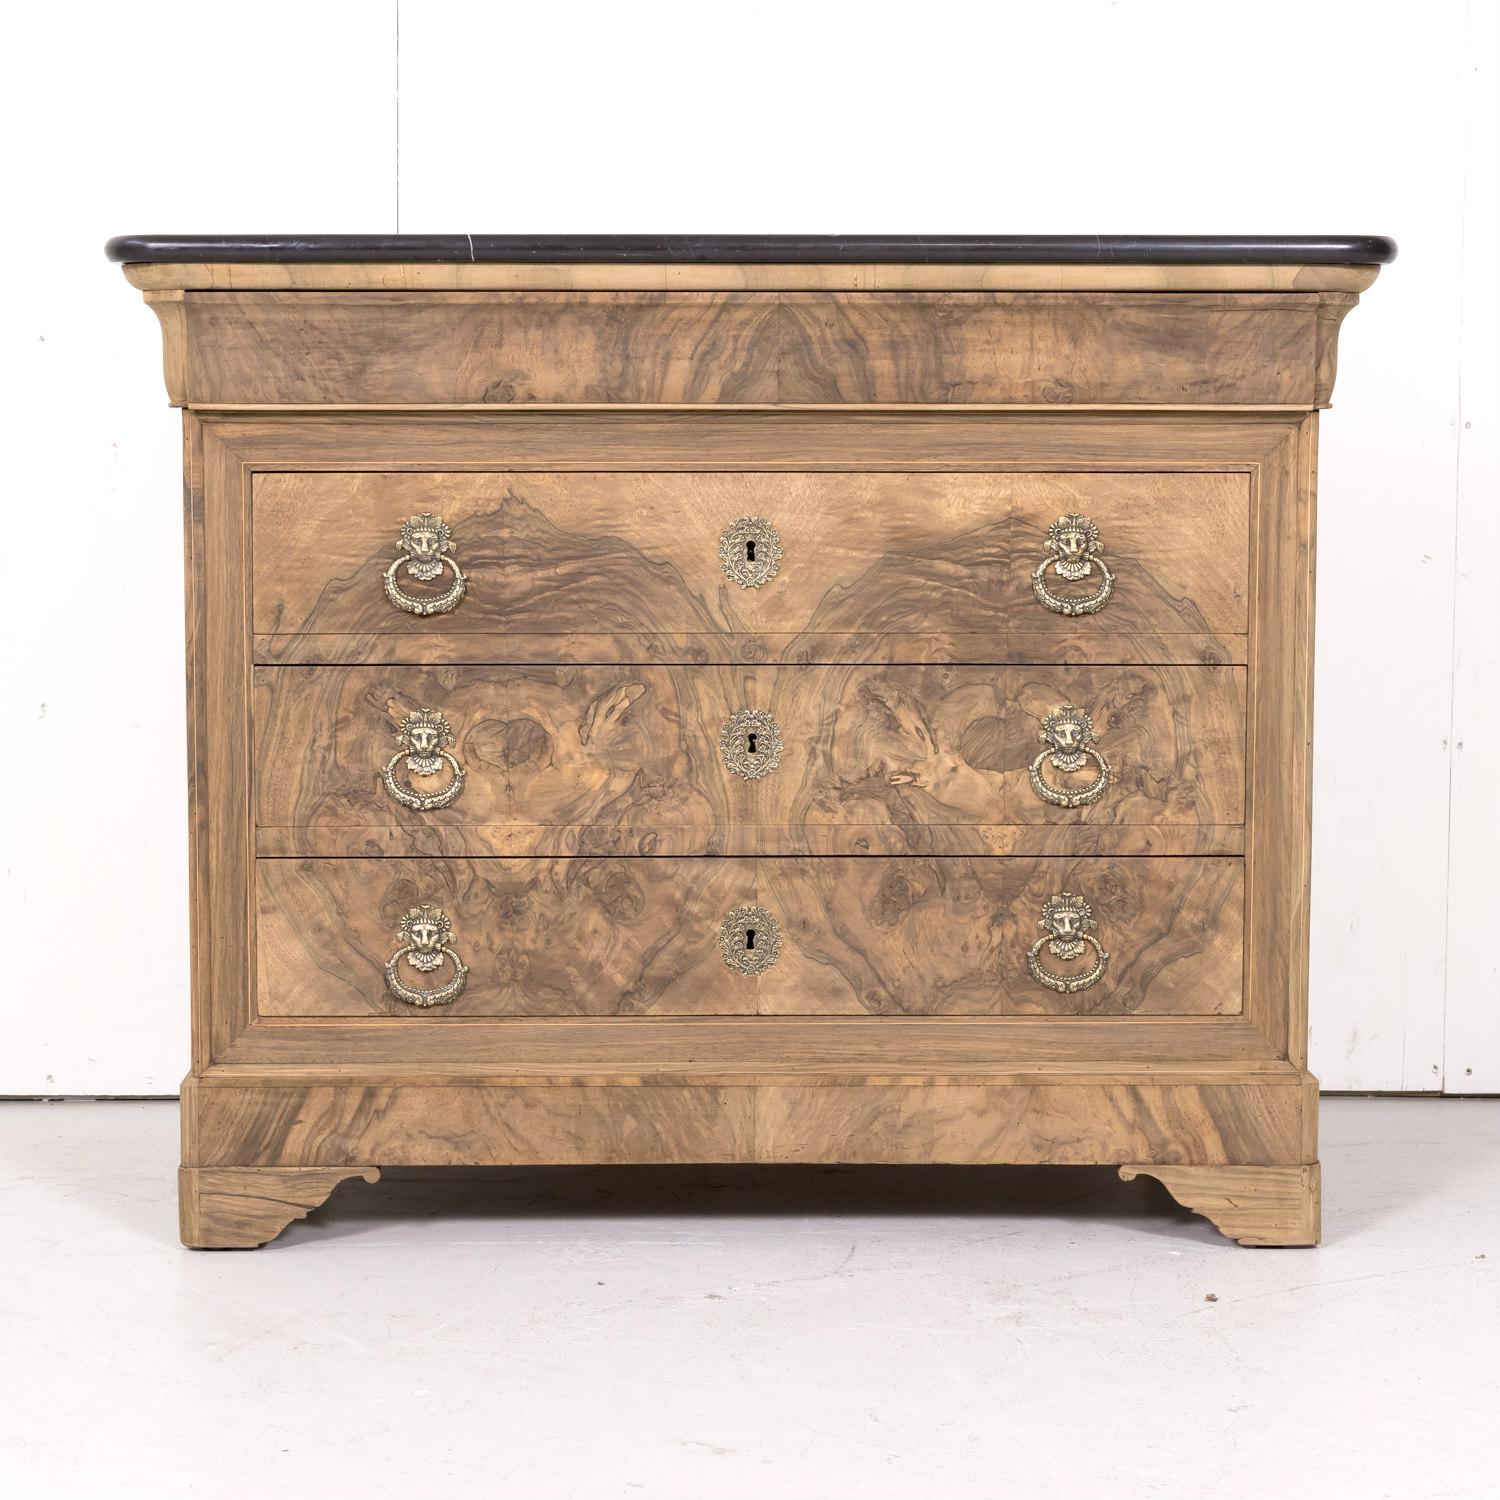 A striking 19th century French Louis Philippe style bleached commode handcrafted of walnut with a bookmatched burled walnut front by talented artisans in Lyon, circa 1870s. Having a beautiful black marble top that rests above a doucine apron drawer